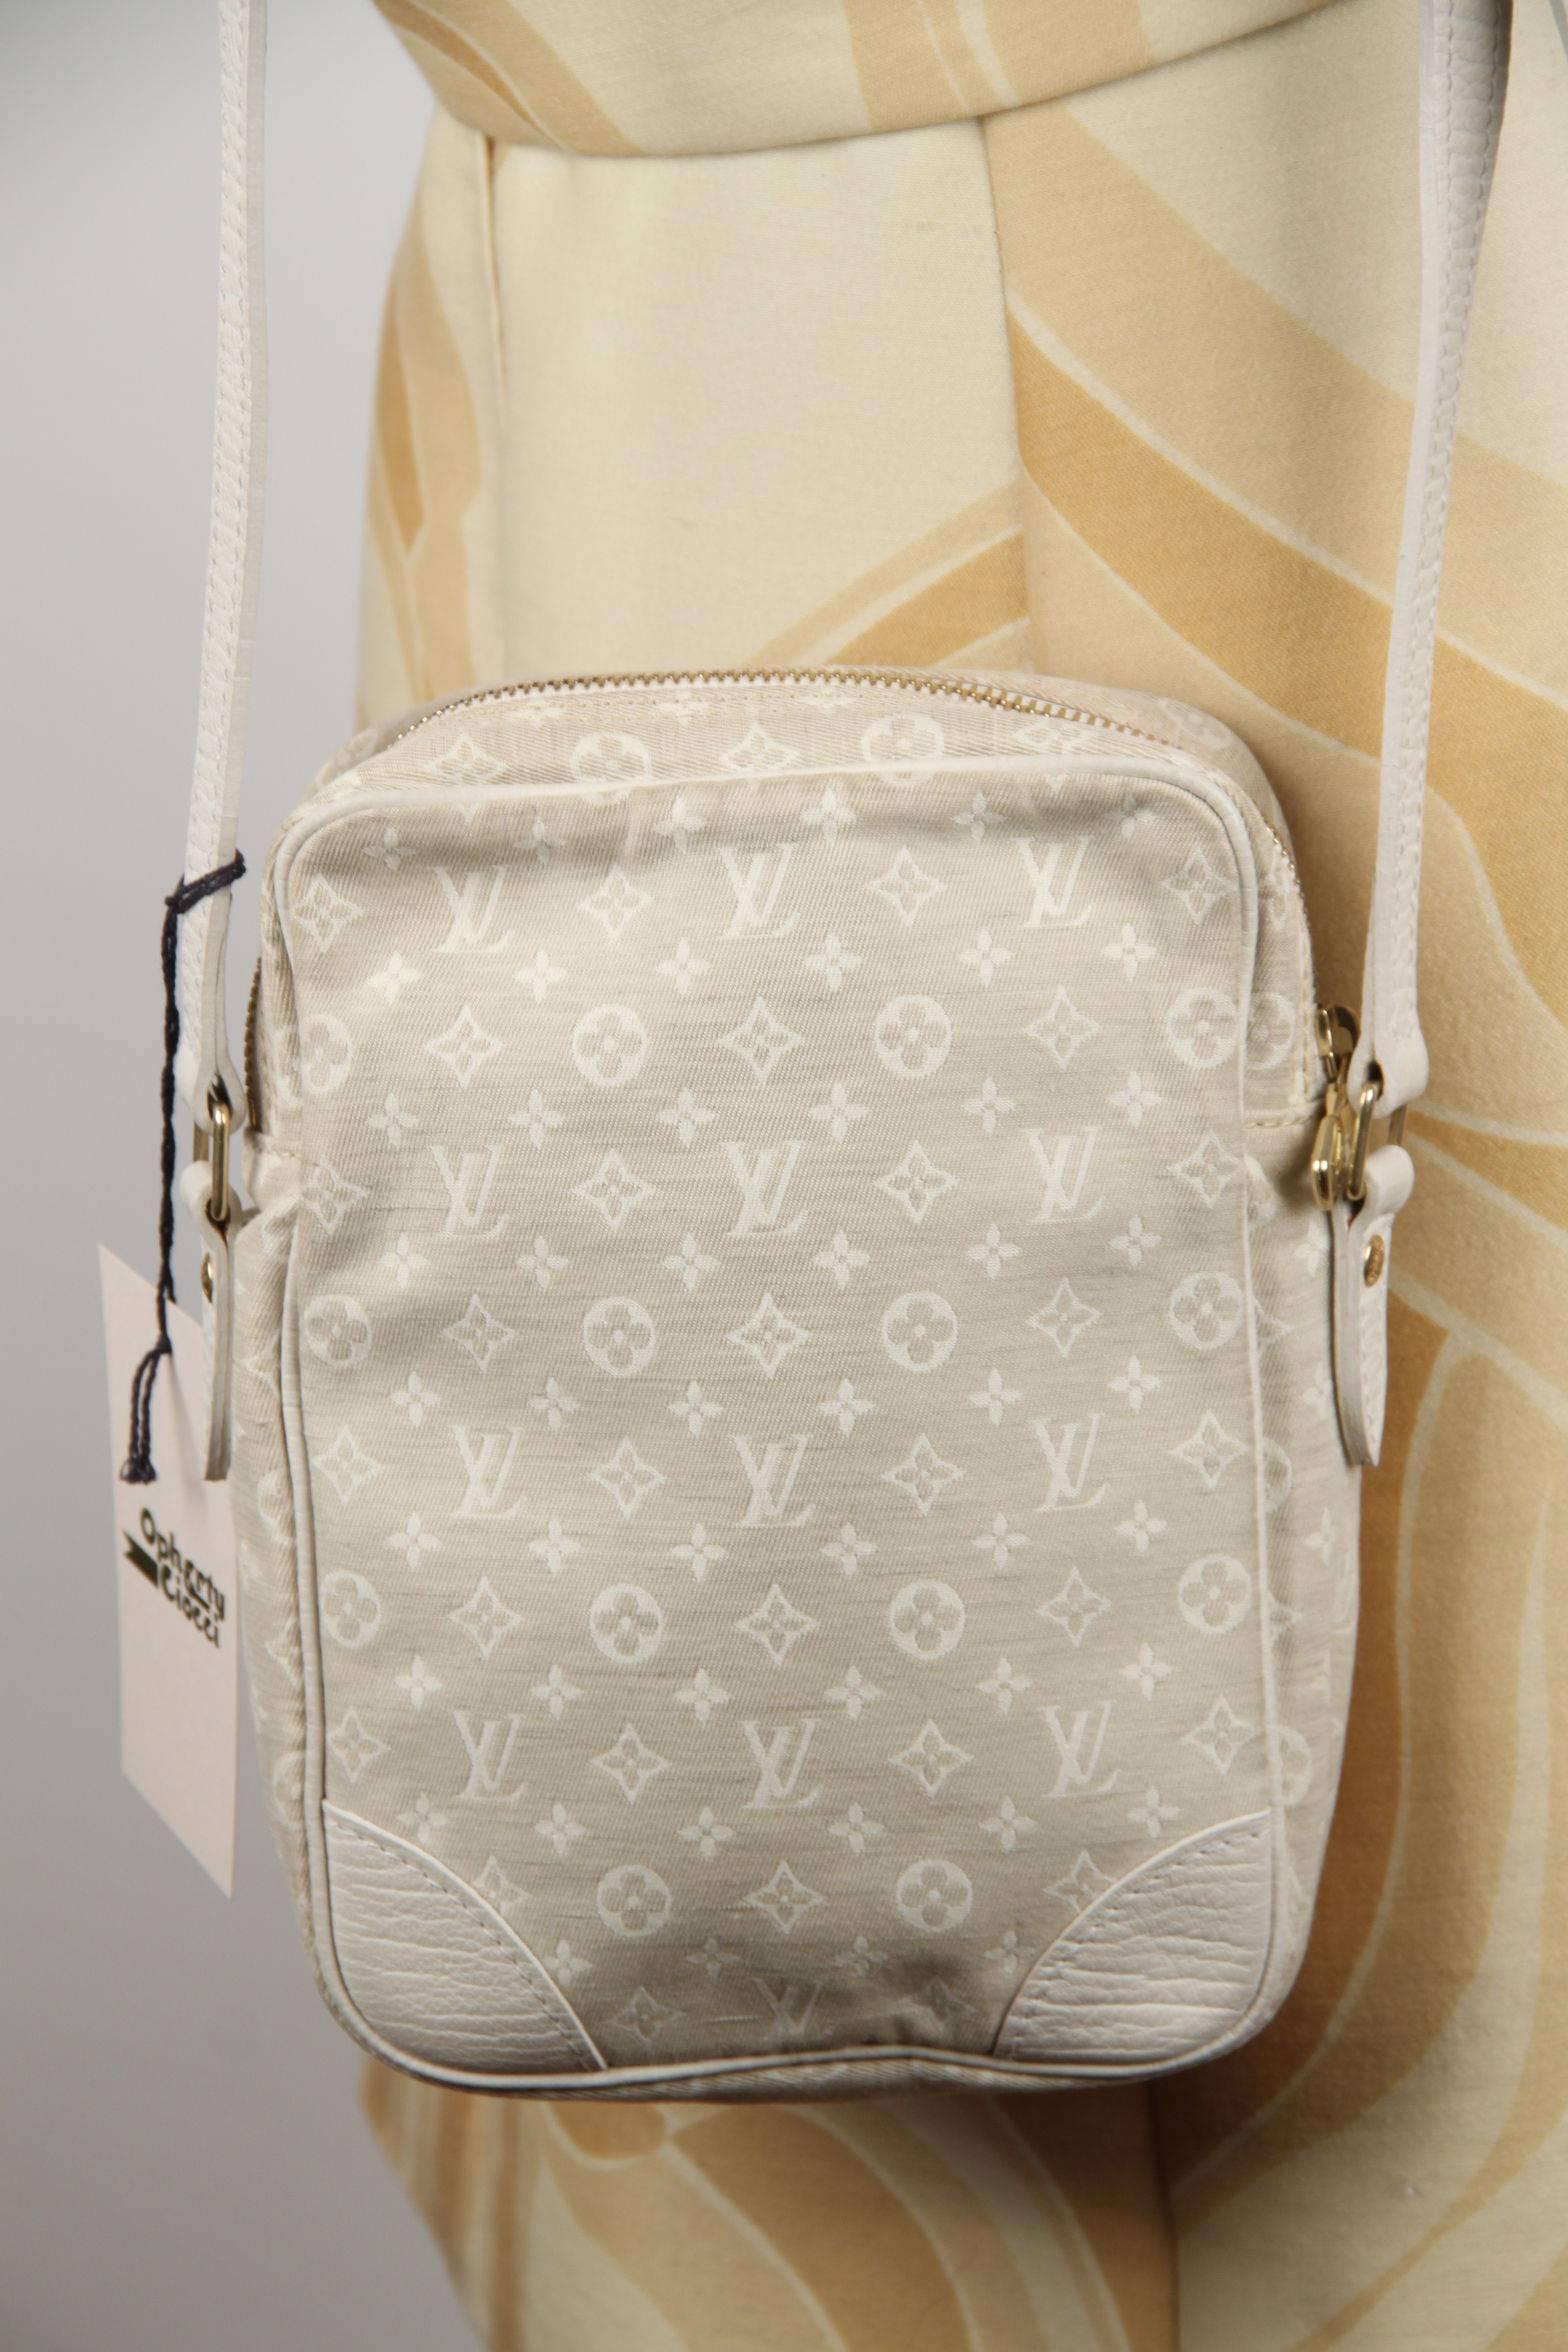 This stylish DANUBE messenger bag is beautifully crafted of cotton and linen Louis Vuitton monogram MINI LIN canvas in a shade of beige. The bag features brown leather trim including a patch pocket and a cross body strap with gold metal hardware.